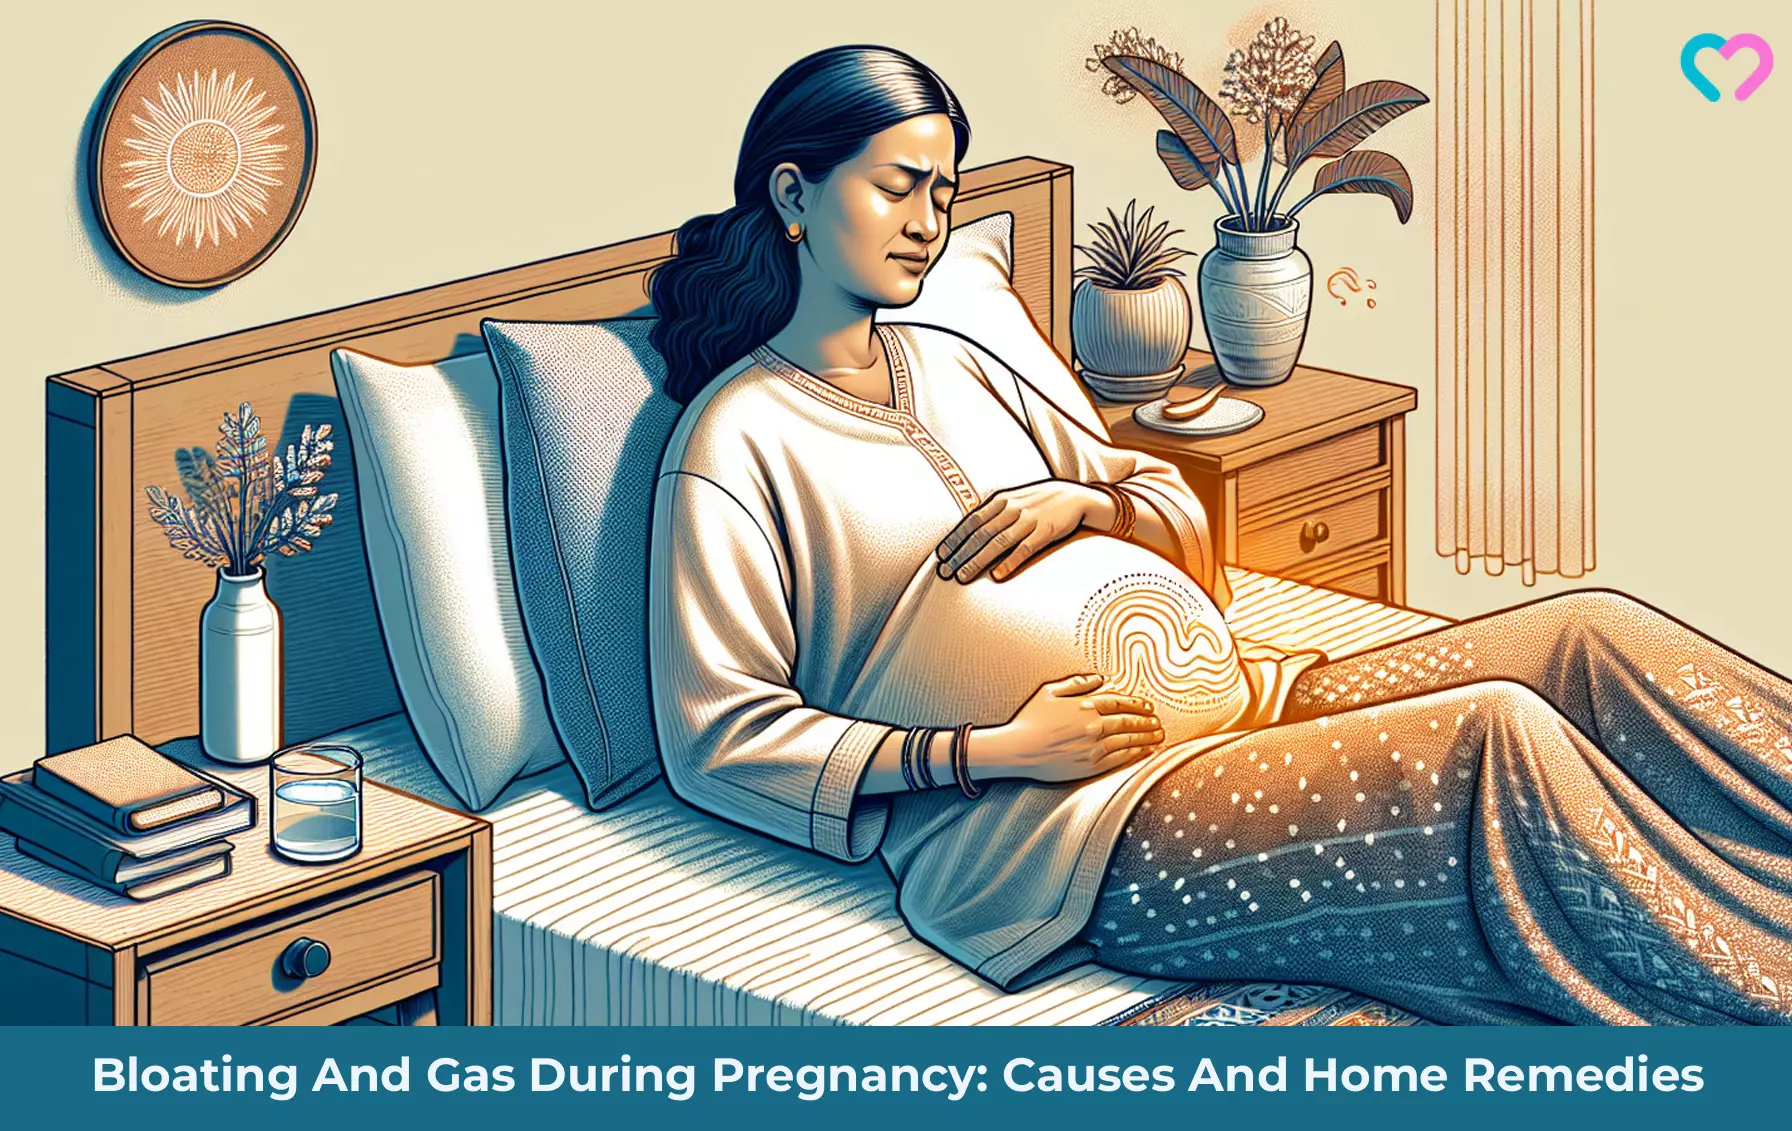 Bloating And Gas During Pregnancy: Causes And Home Remedies_illustration